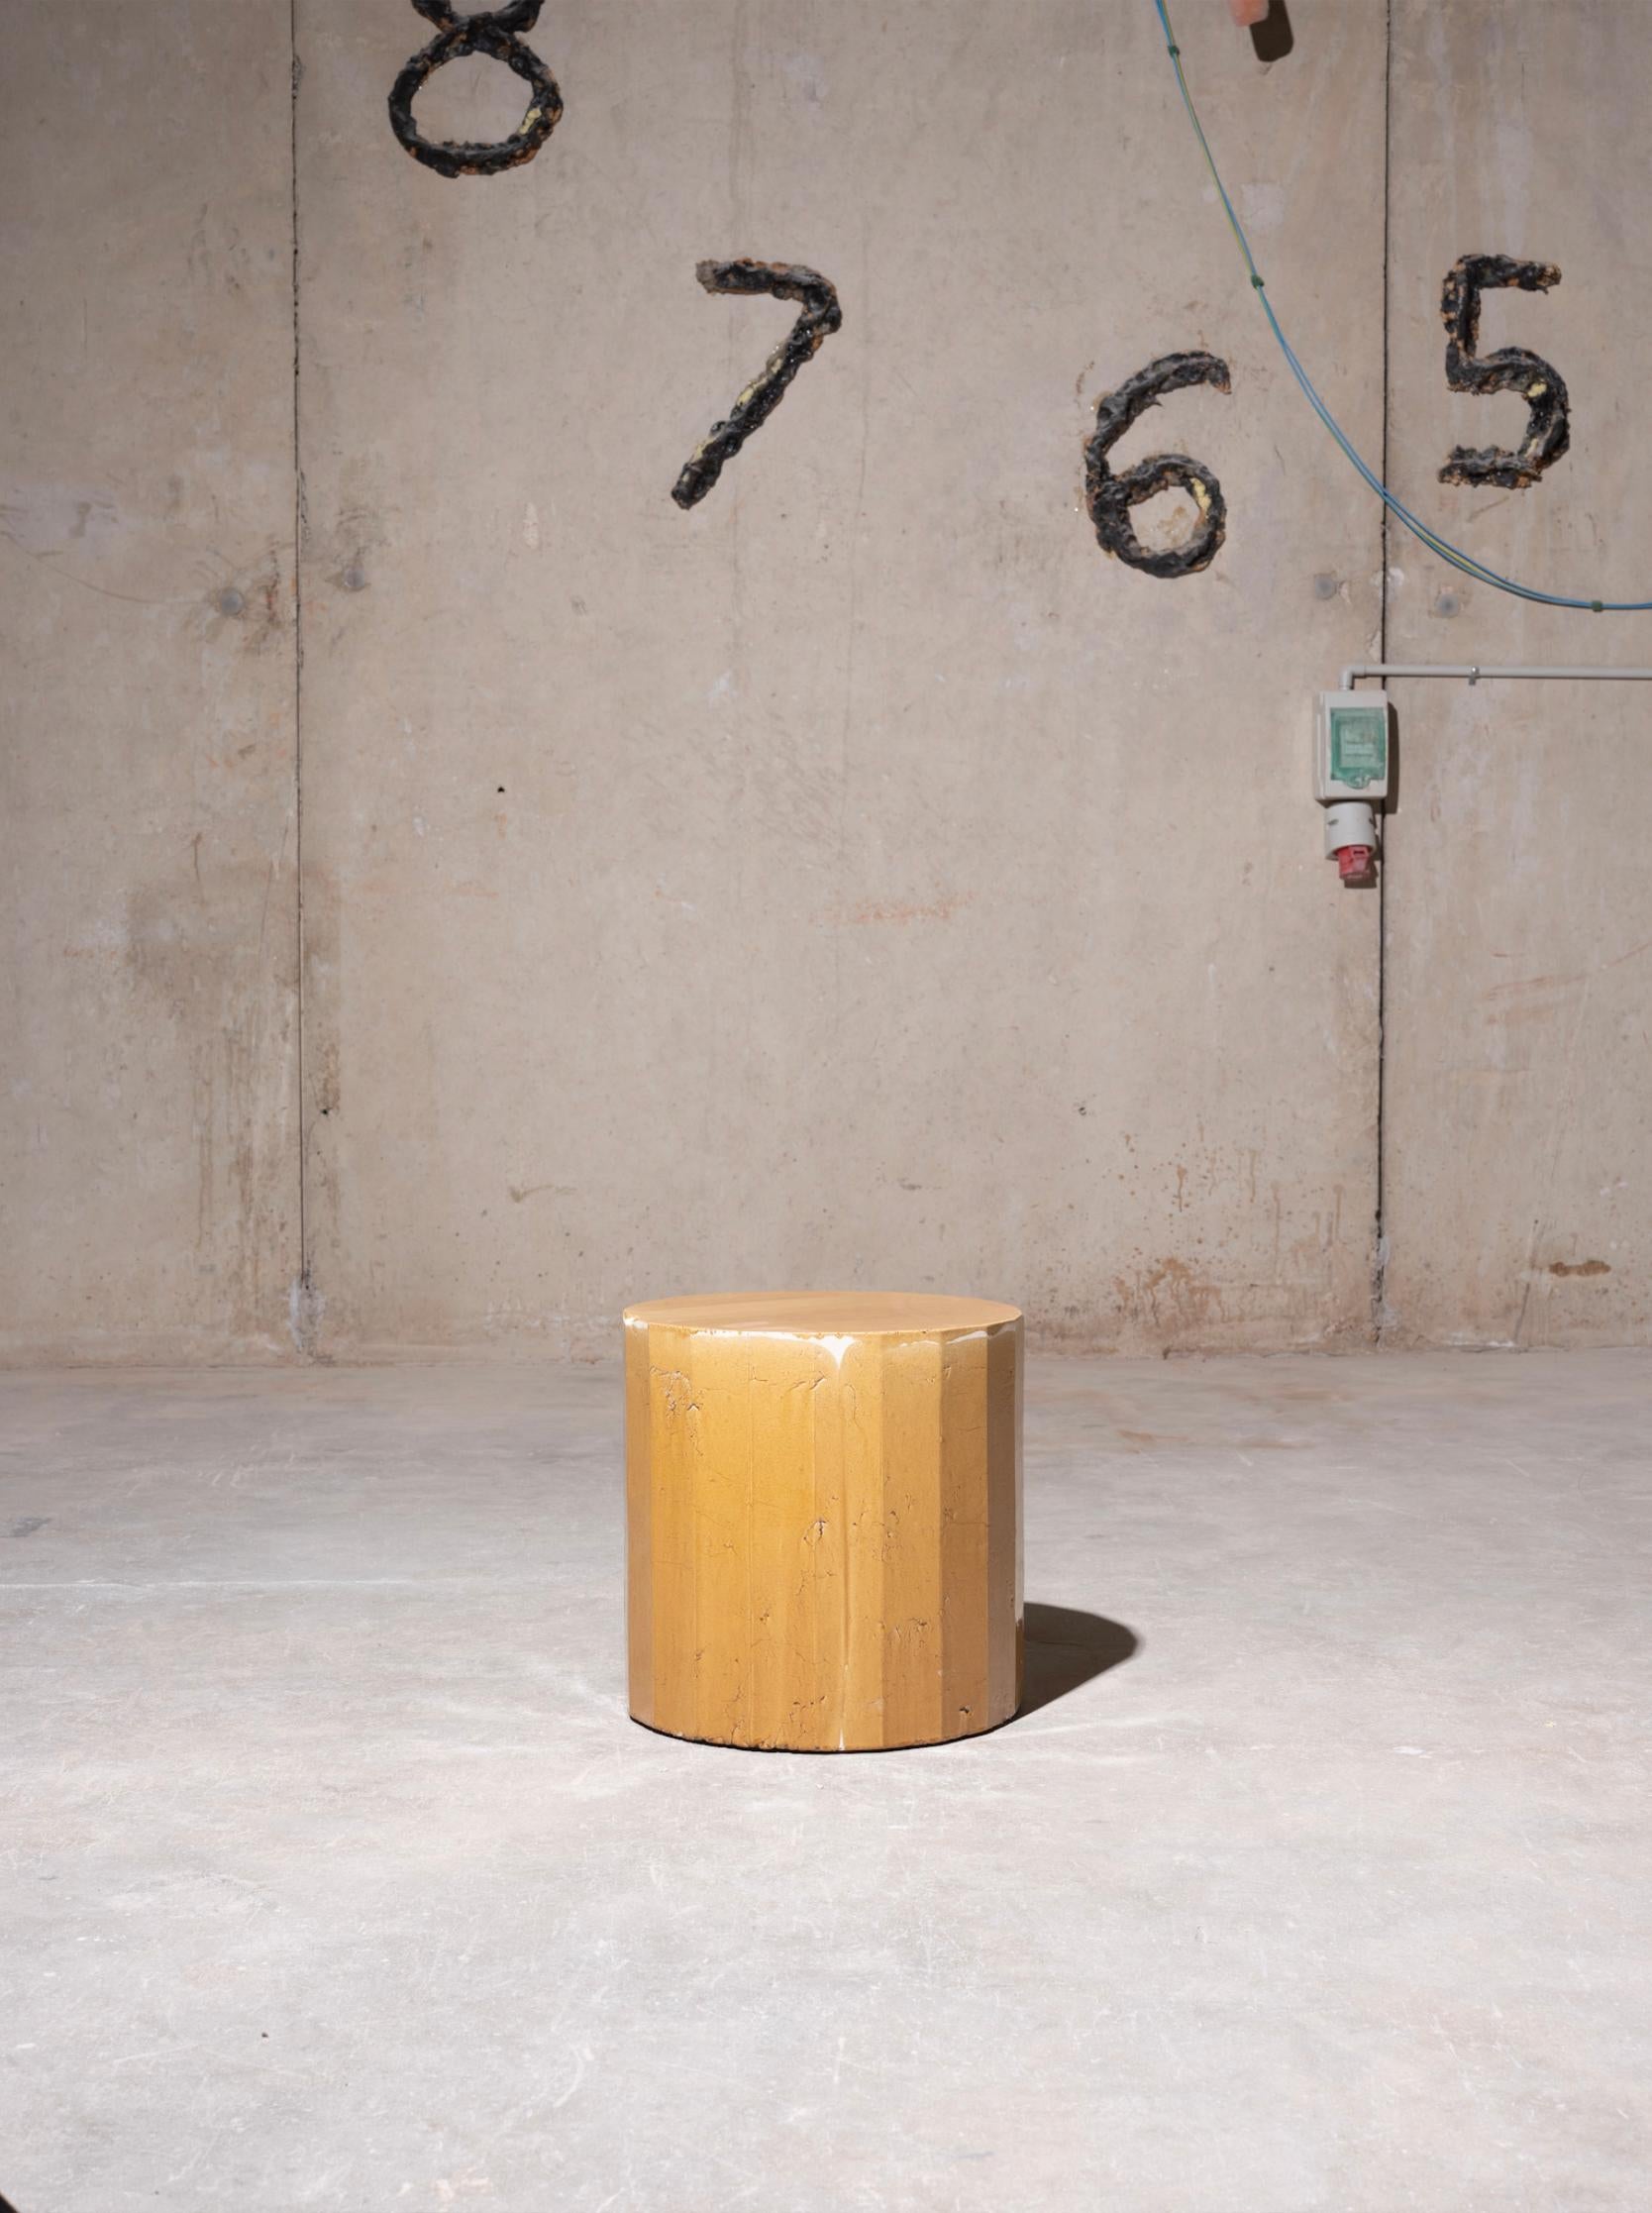 Contemporary Facetated Ceramic Side Table Column Stool Glazed Caramel In New Condition For Sale In Rubi, Catalunya